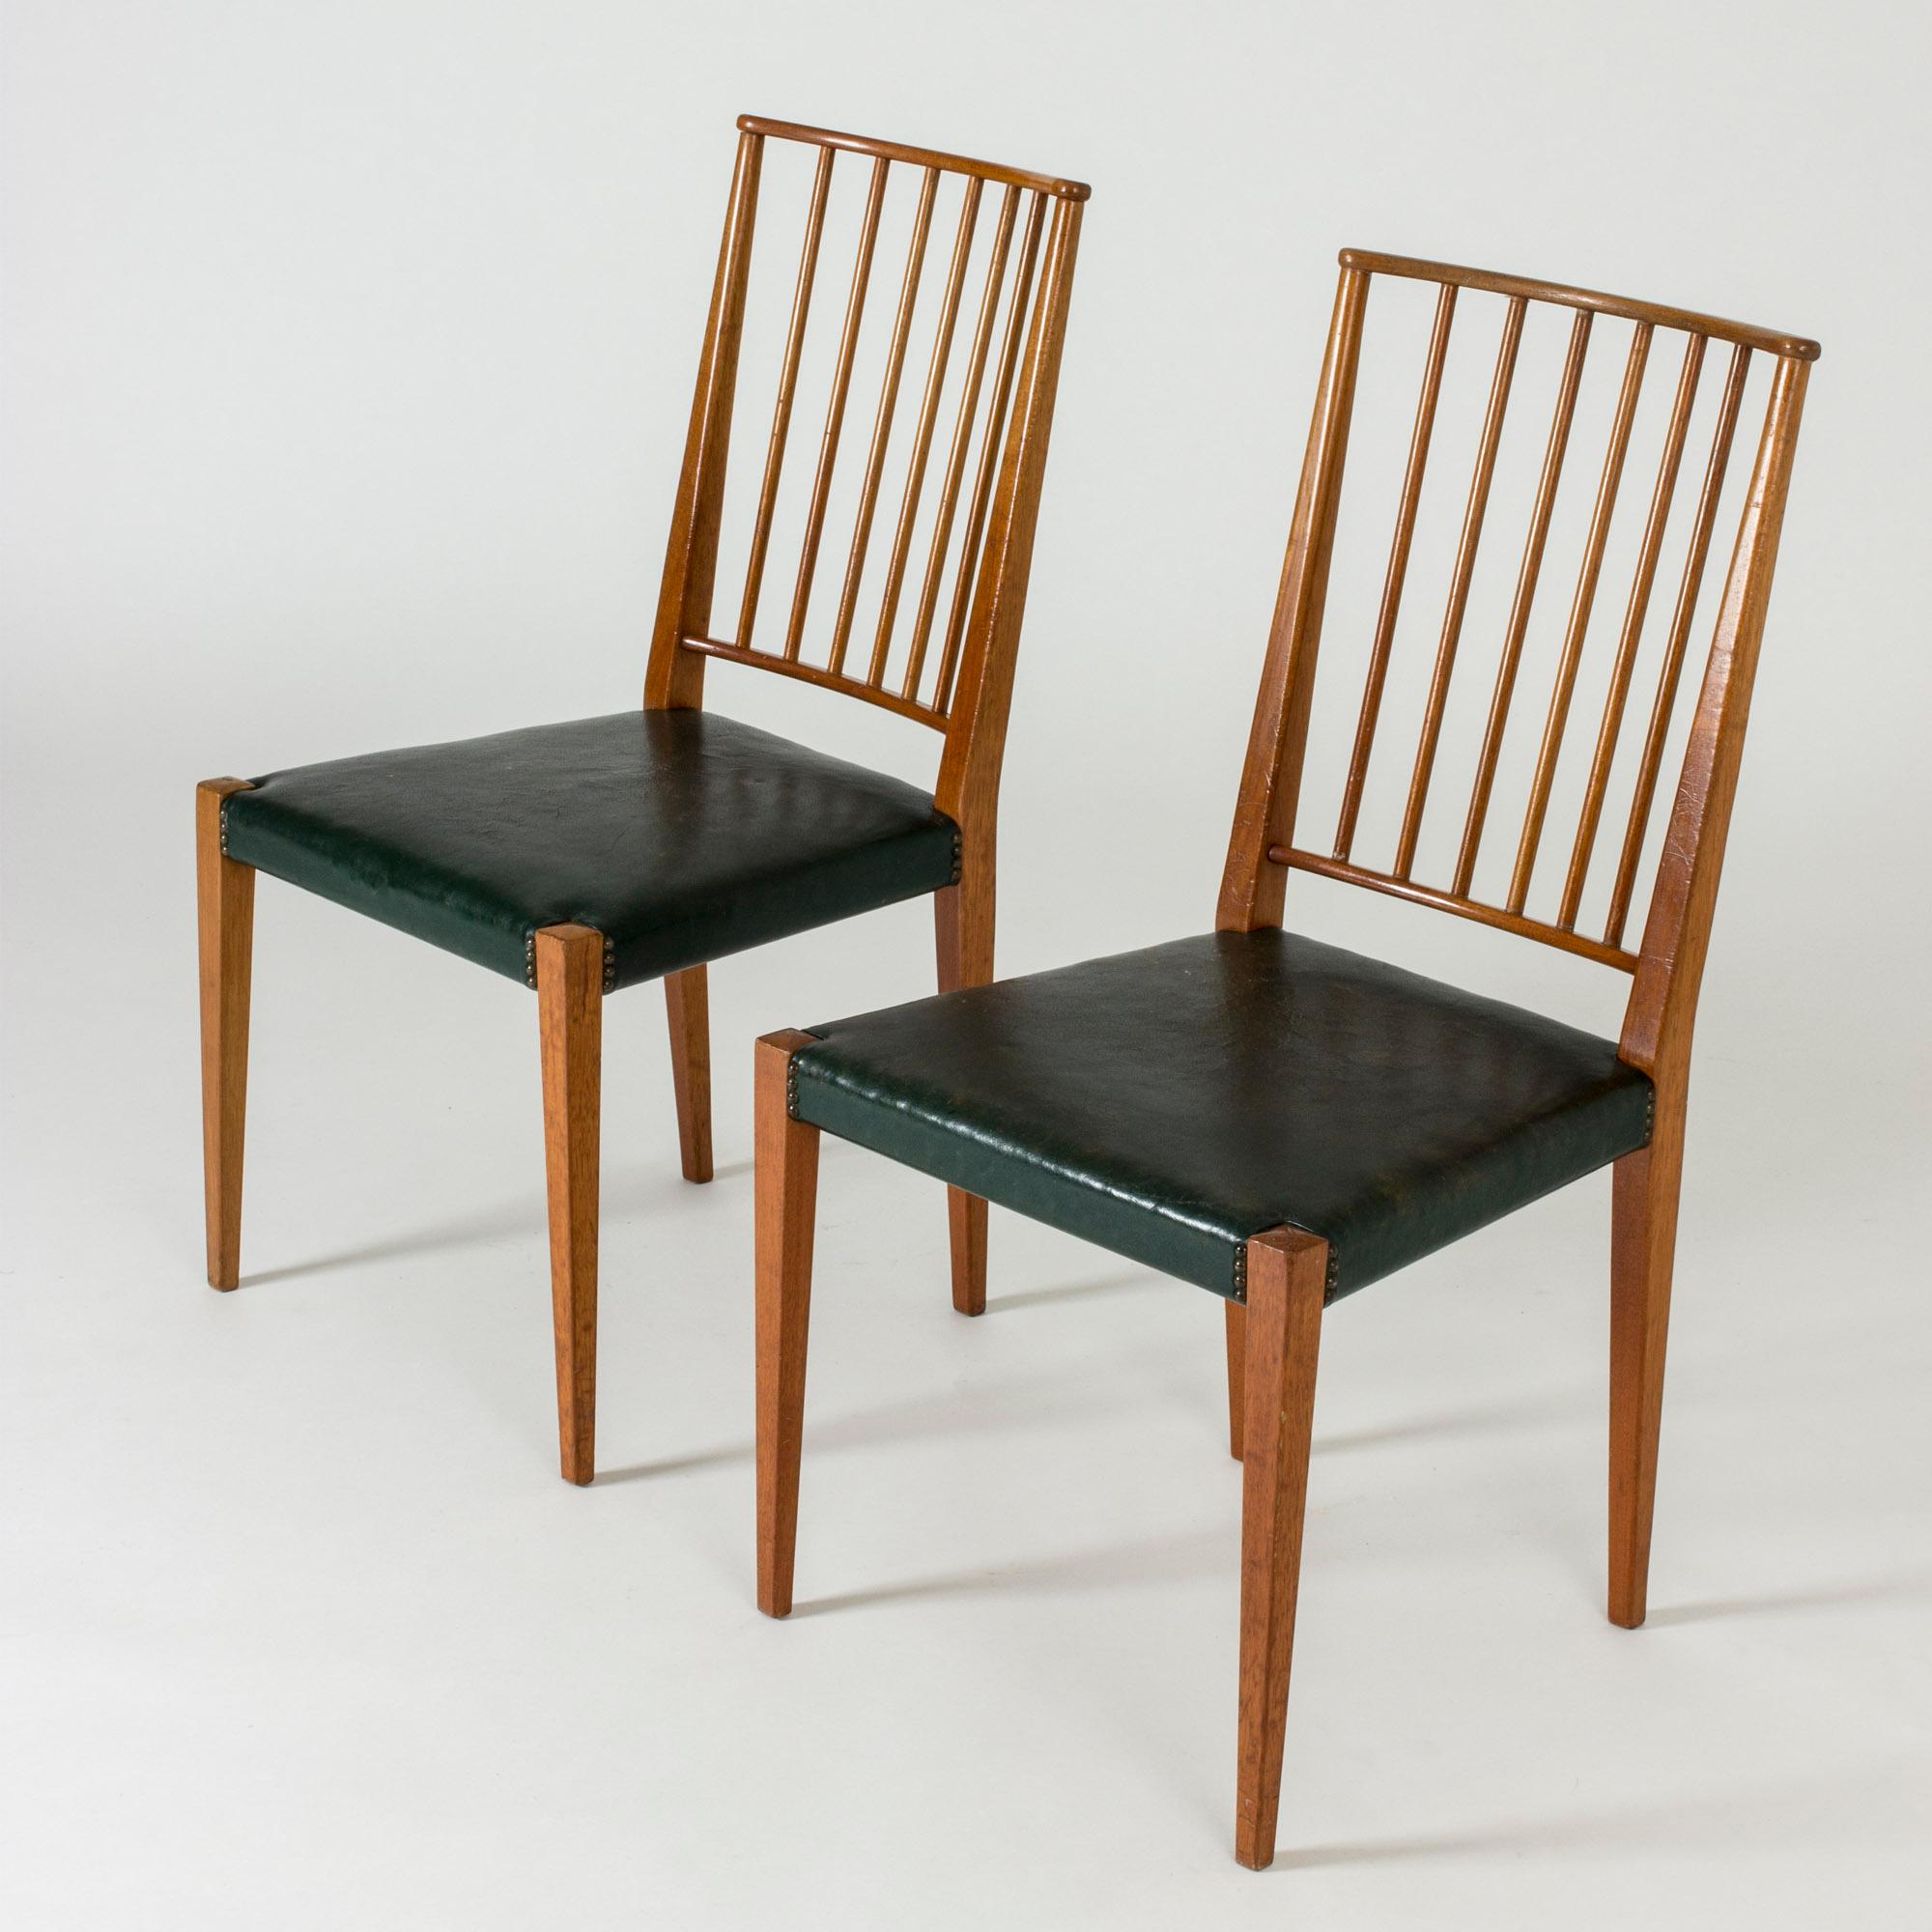 Mid-20th Century Mahogany and Leather Dining Chairs by Josef Frank